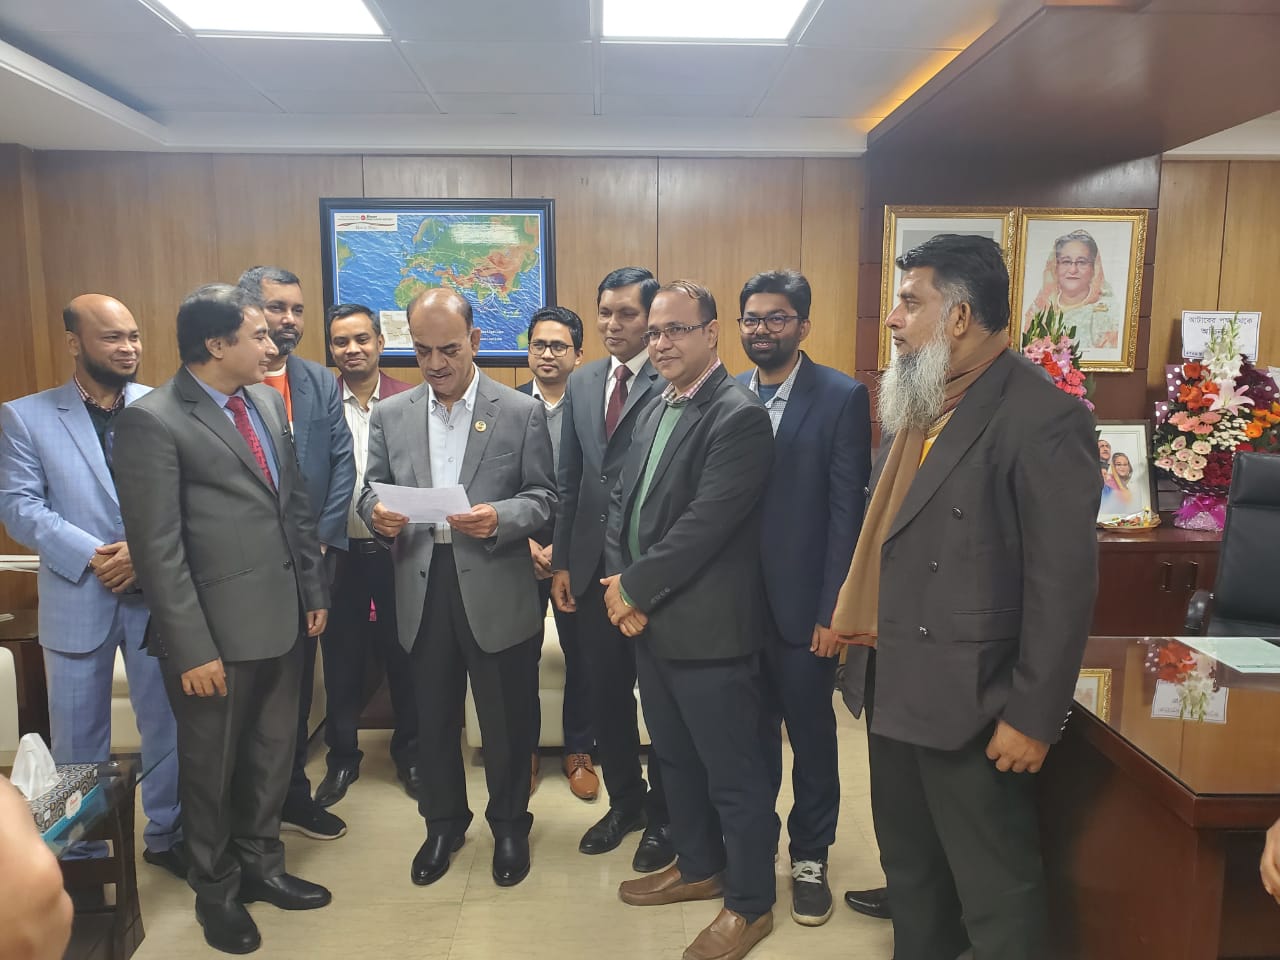 Mr. Md. Golam Rahman, DG of Mission Audit Directorate, has met to congratulate to Mr. Muhammad Faruk Khan, hon'ble minister of Ministry of Civil Aviation and Tourism